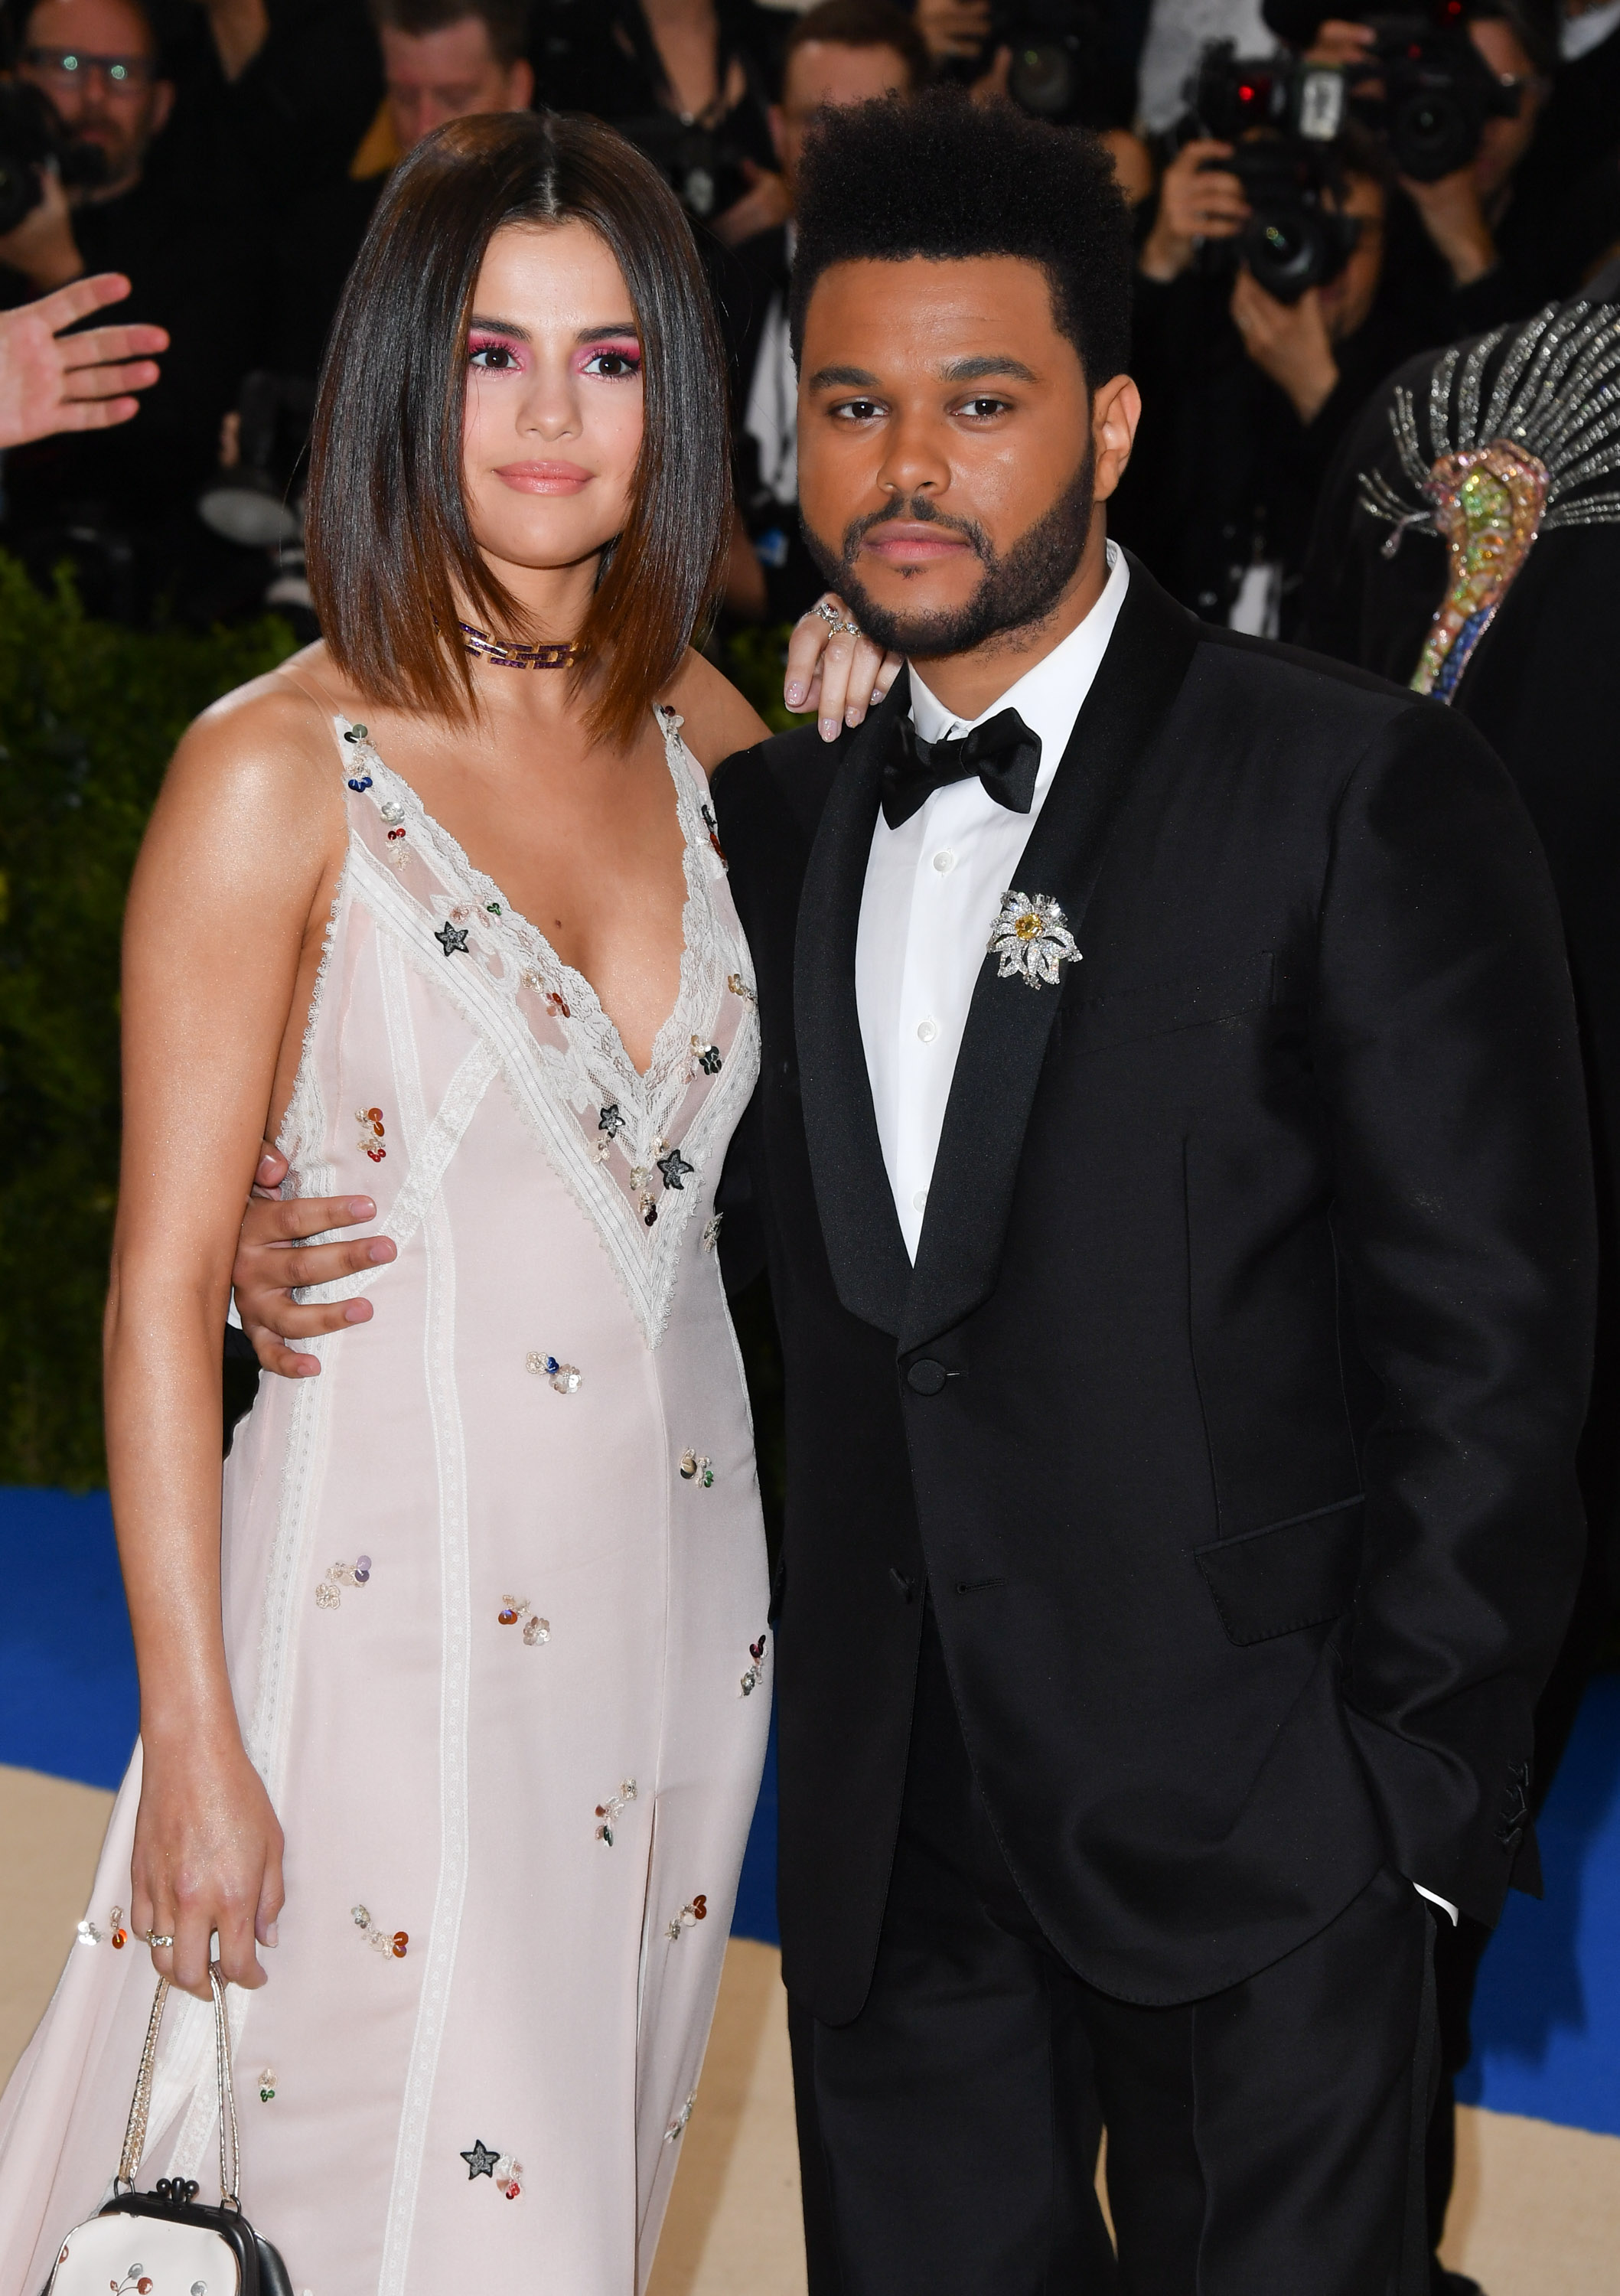 NEW YORK, NY - MAY 01: Selena Gomez (L) and The Weeknd attends the 'Rei Kawakubo/Comme des Garcons: Art Of The In-Between' Costume Institute Gala at Metropolitan Museum of Art on May 1, 2017 in New York City. (Photo by George Pimentel/WireImage)